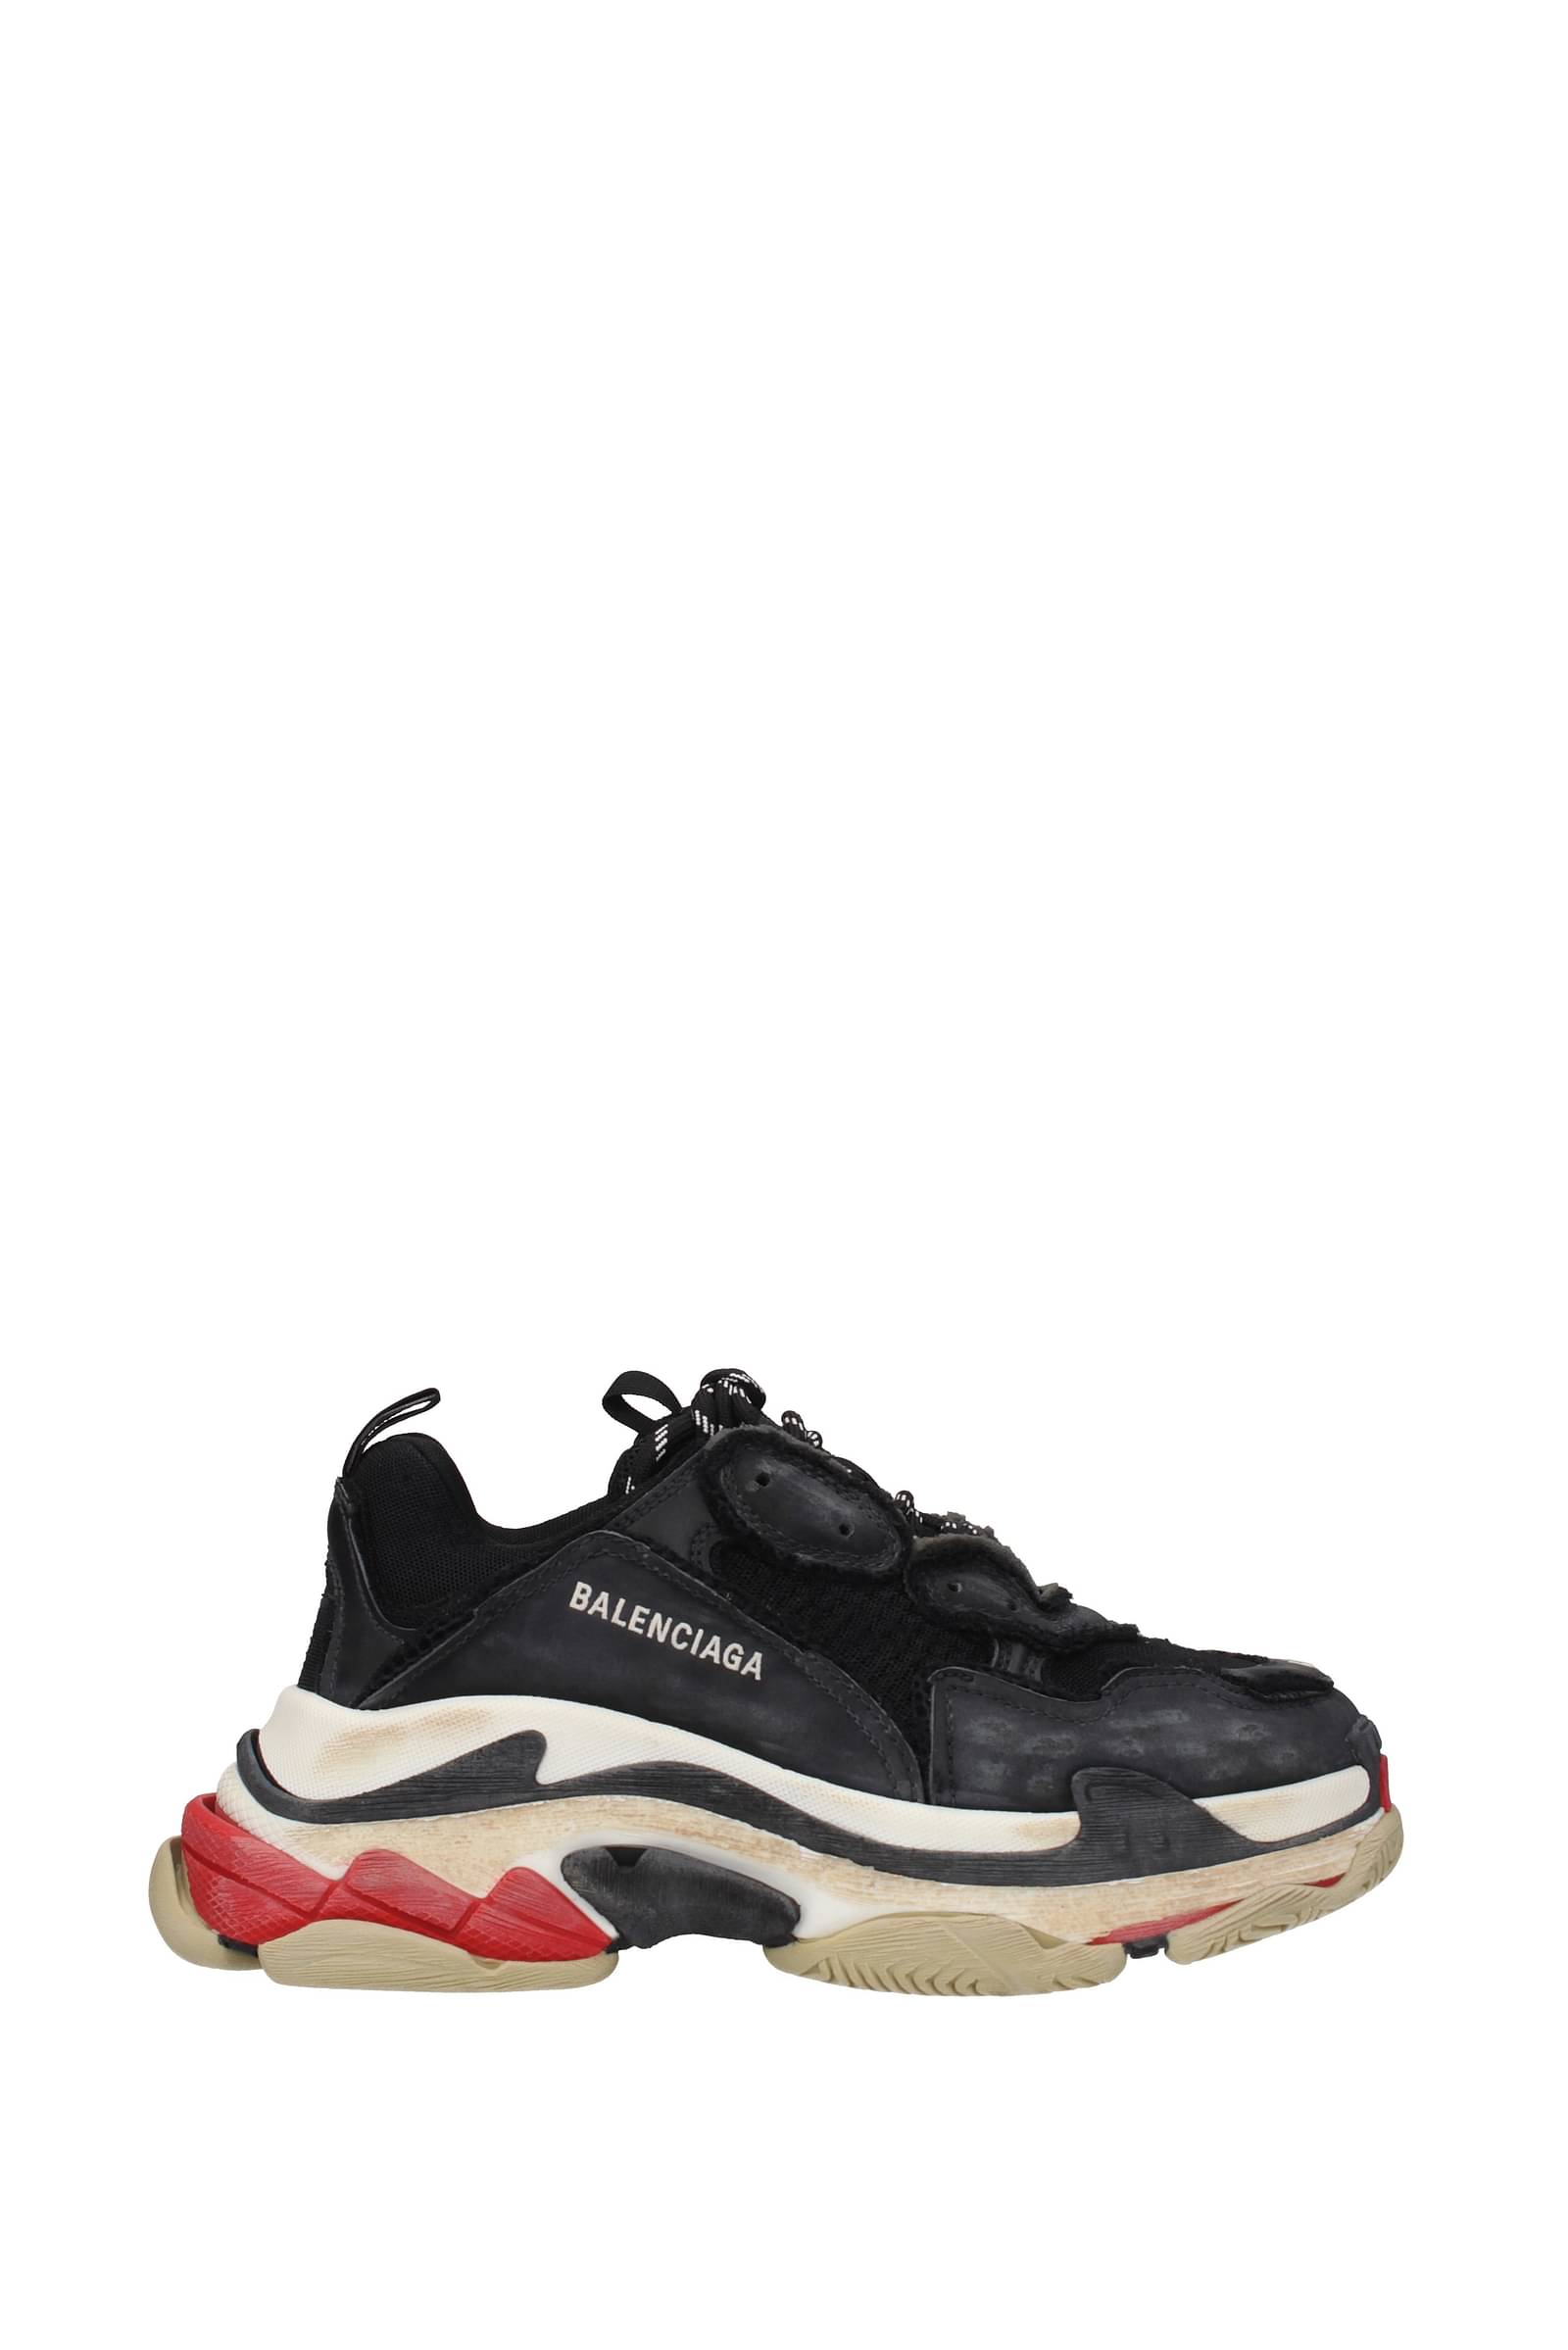 Balenciaga Black Friday Sale Shop Items Up To 50 Off On Nordstrom   StyleCaster